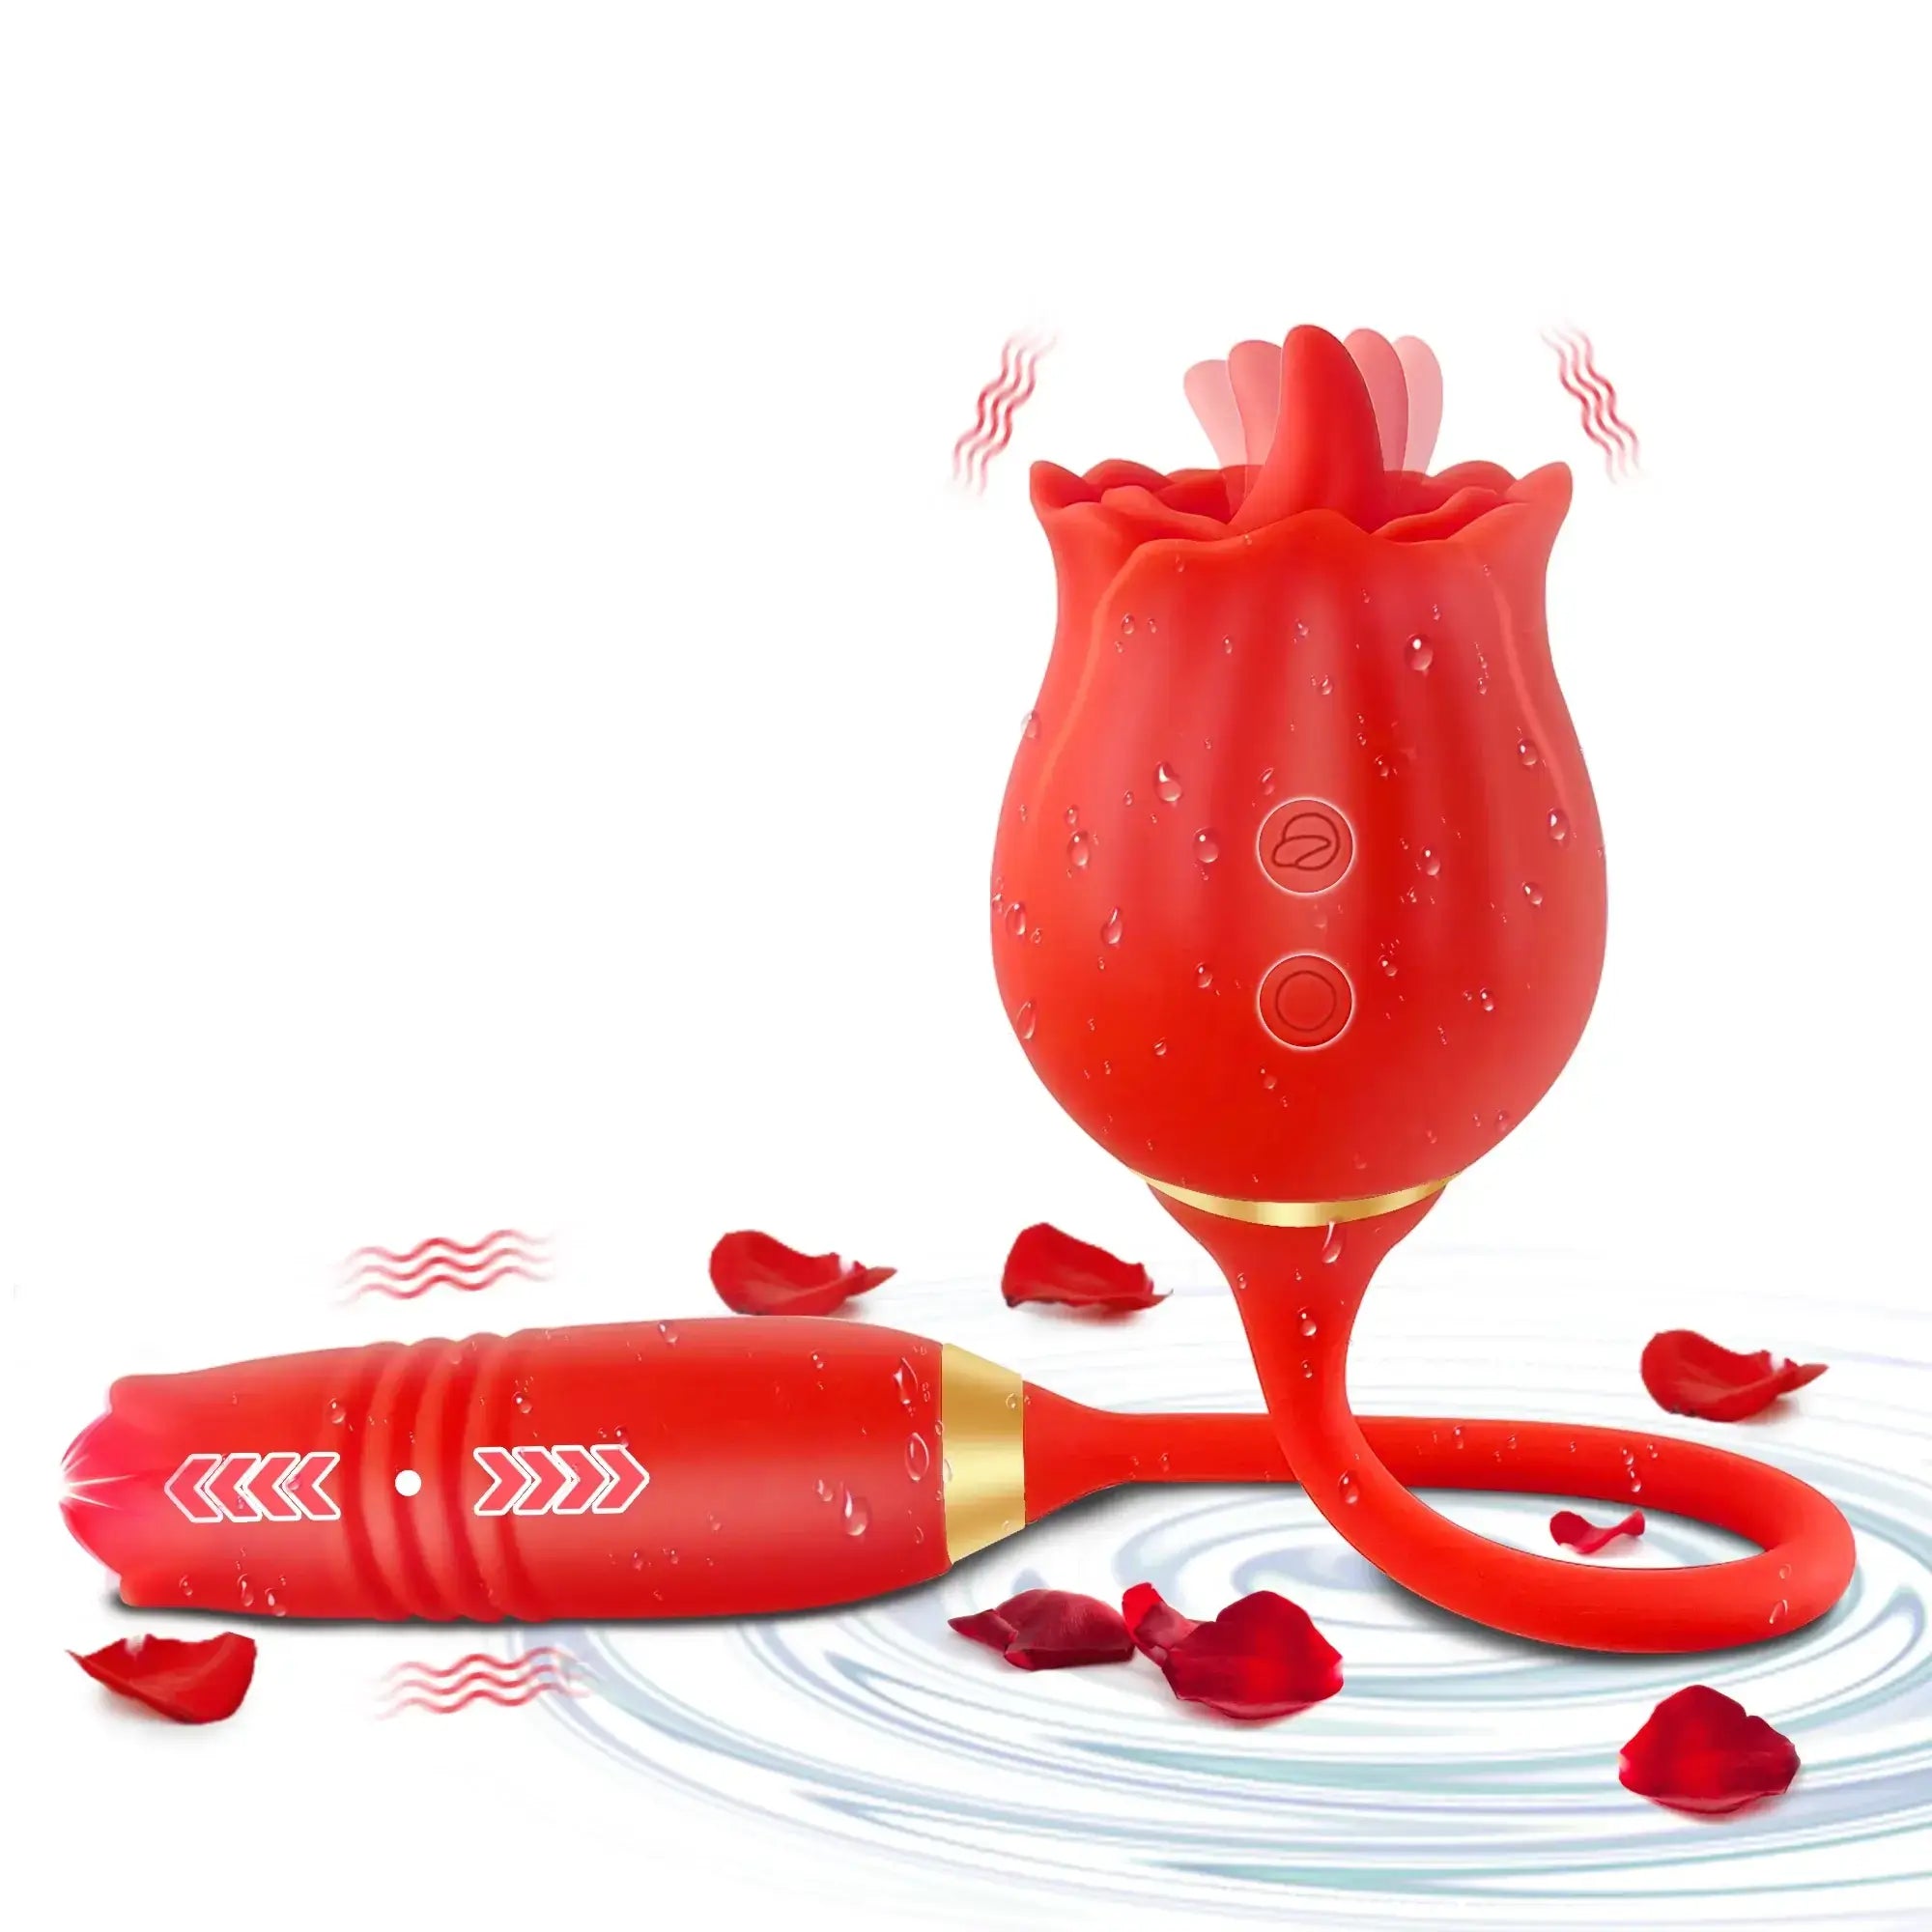 3in1 Tongue Licking Vibrating Thrusting Rose Sex Toy For Clitoral Stimulator - The Rose Toys